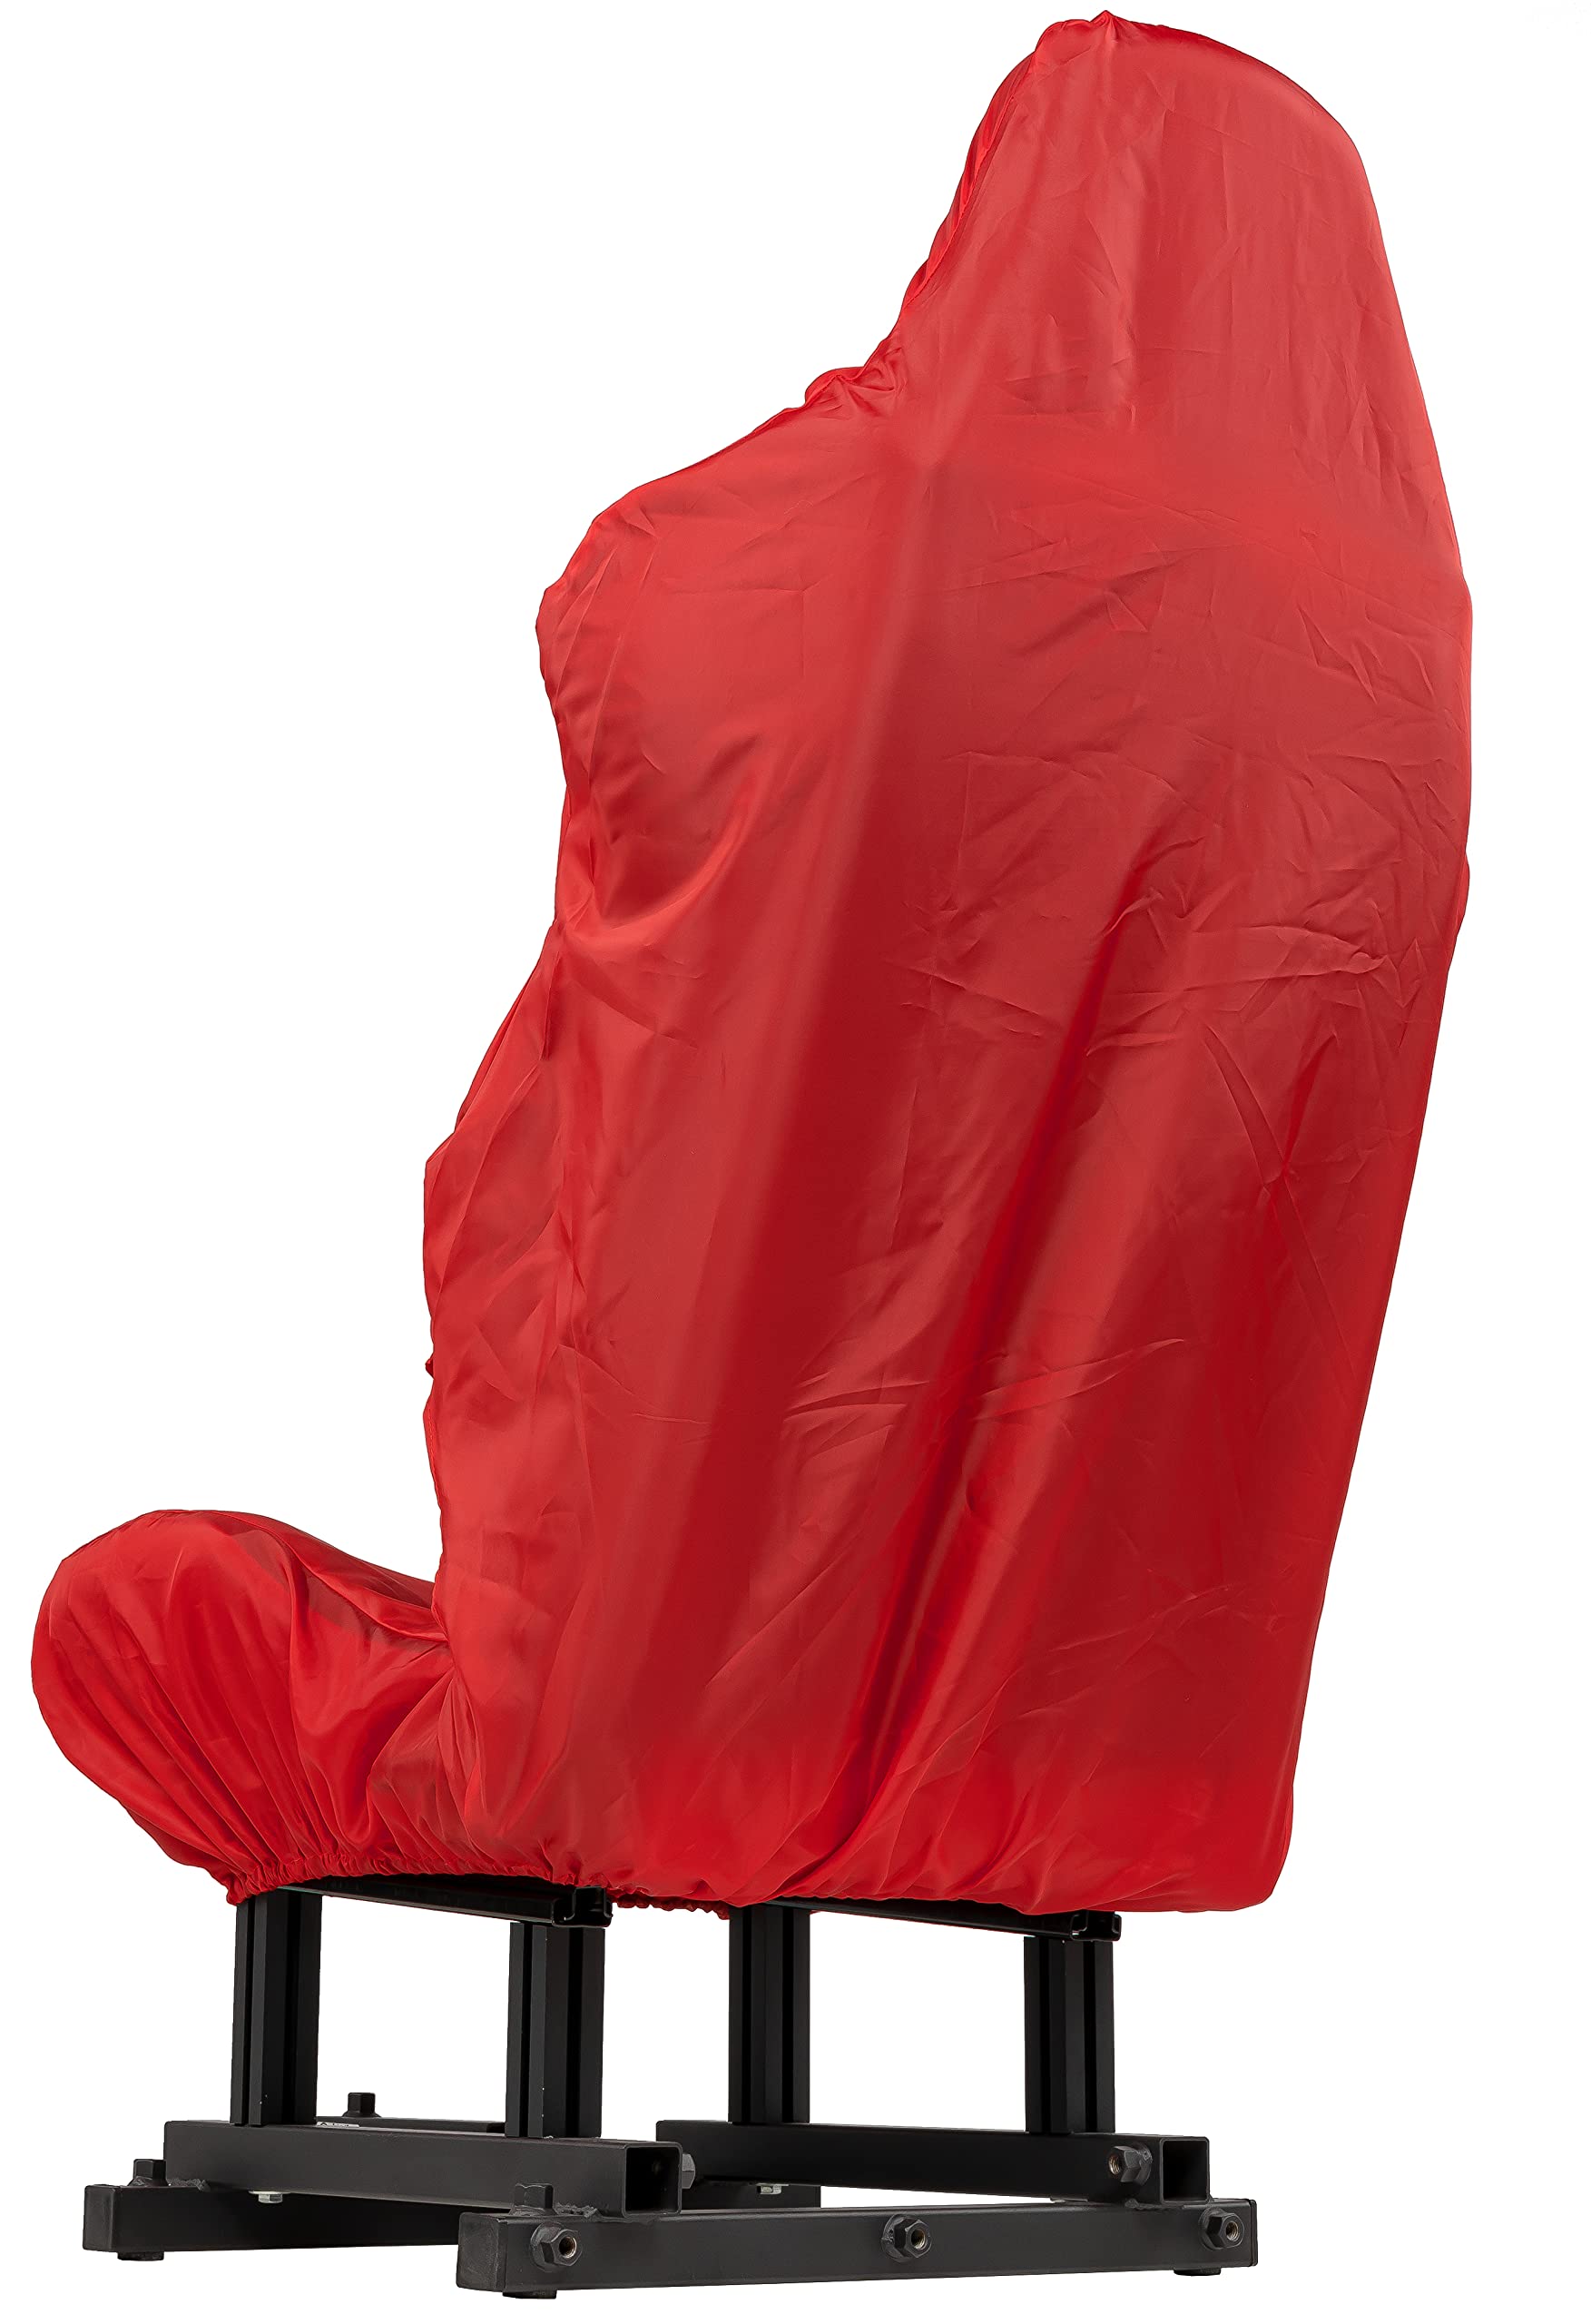 OpenWheeler Racing Seat Cover, Red. Seat Upholstery Protector. Flight and Sim Racing Cockpit Seat Cover.